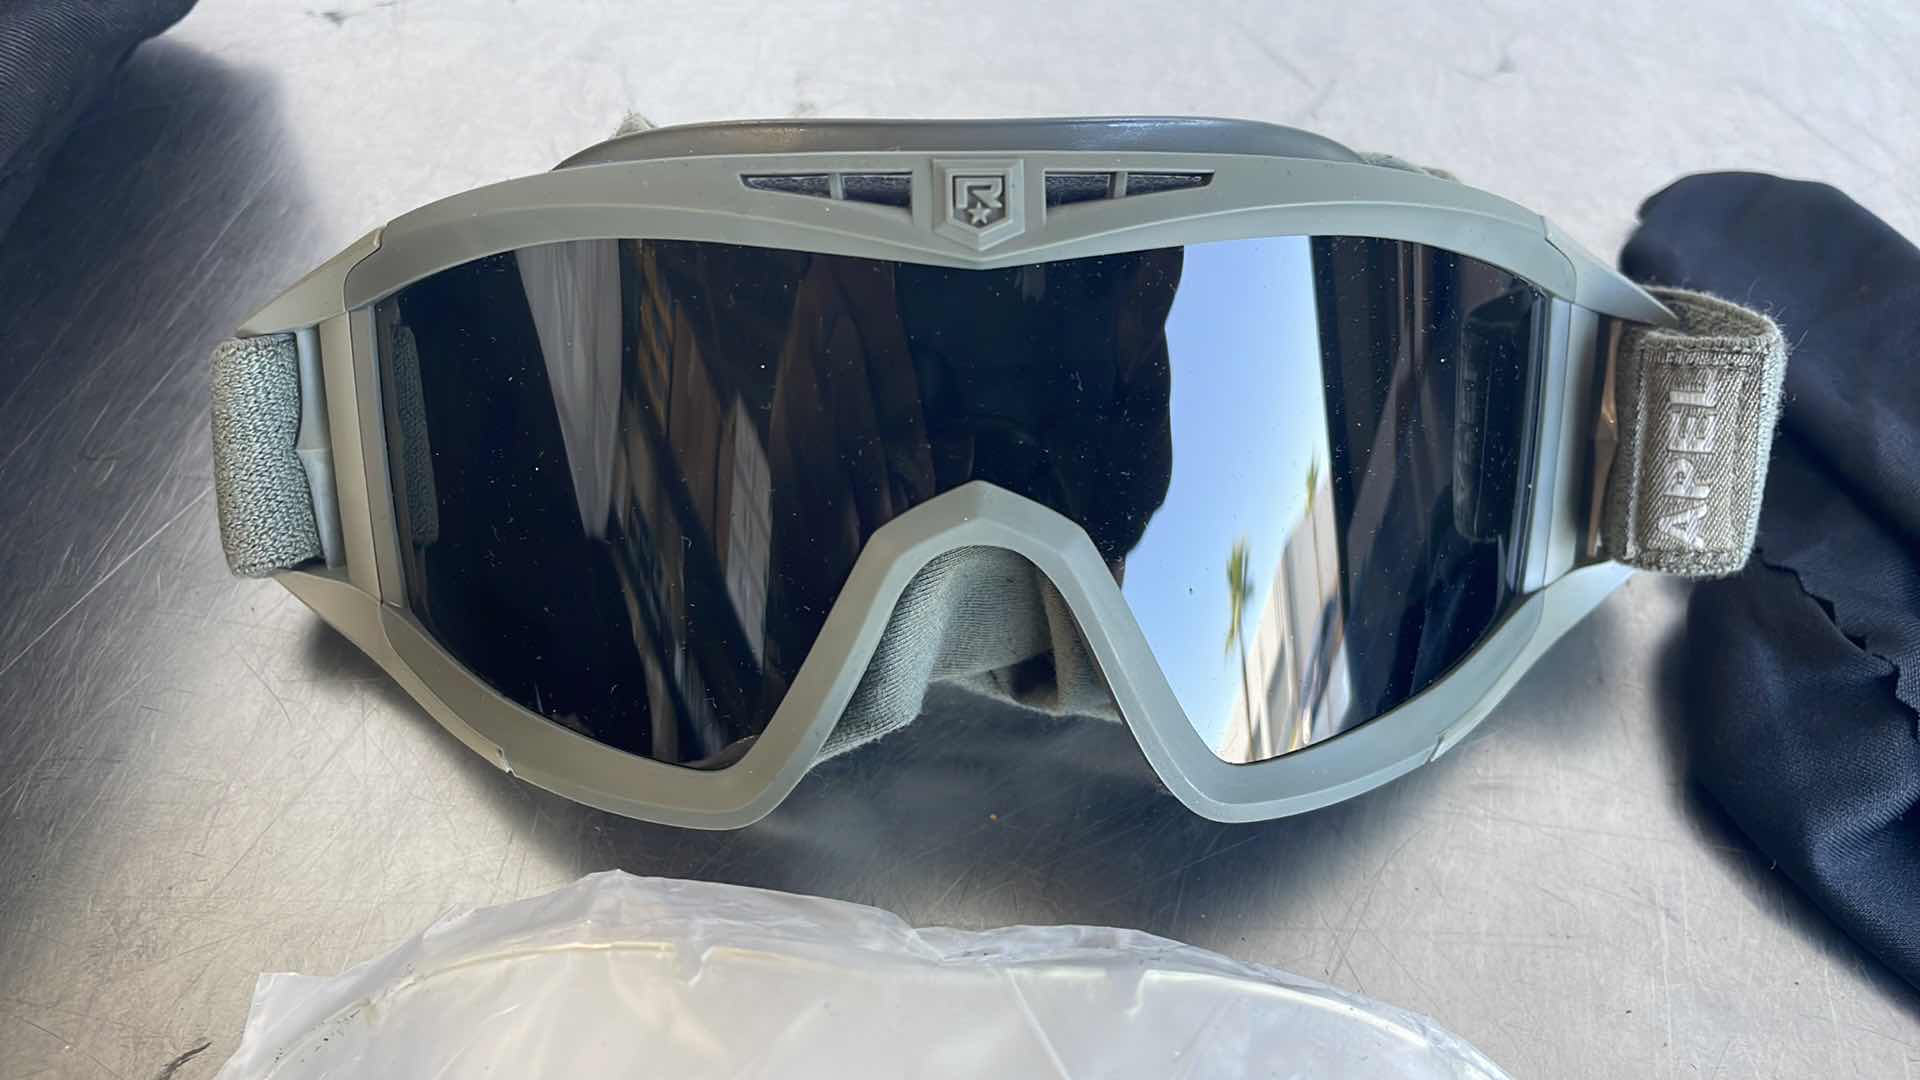 Photo 2 of MILITARY REVISION DESERT LOCUST BALLISTIC SAFETY GOGGLES